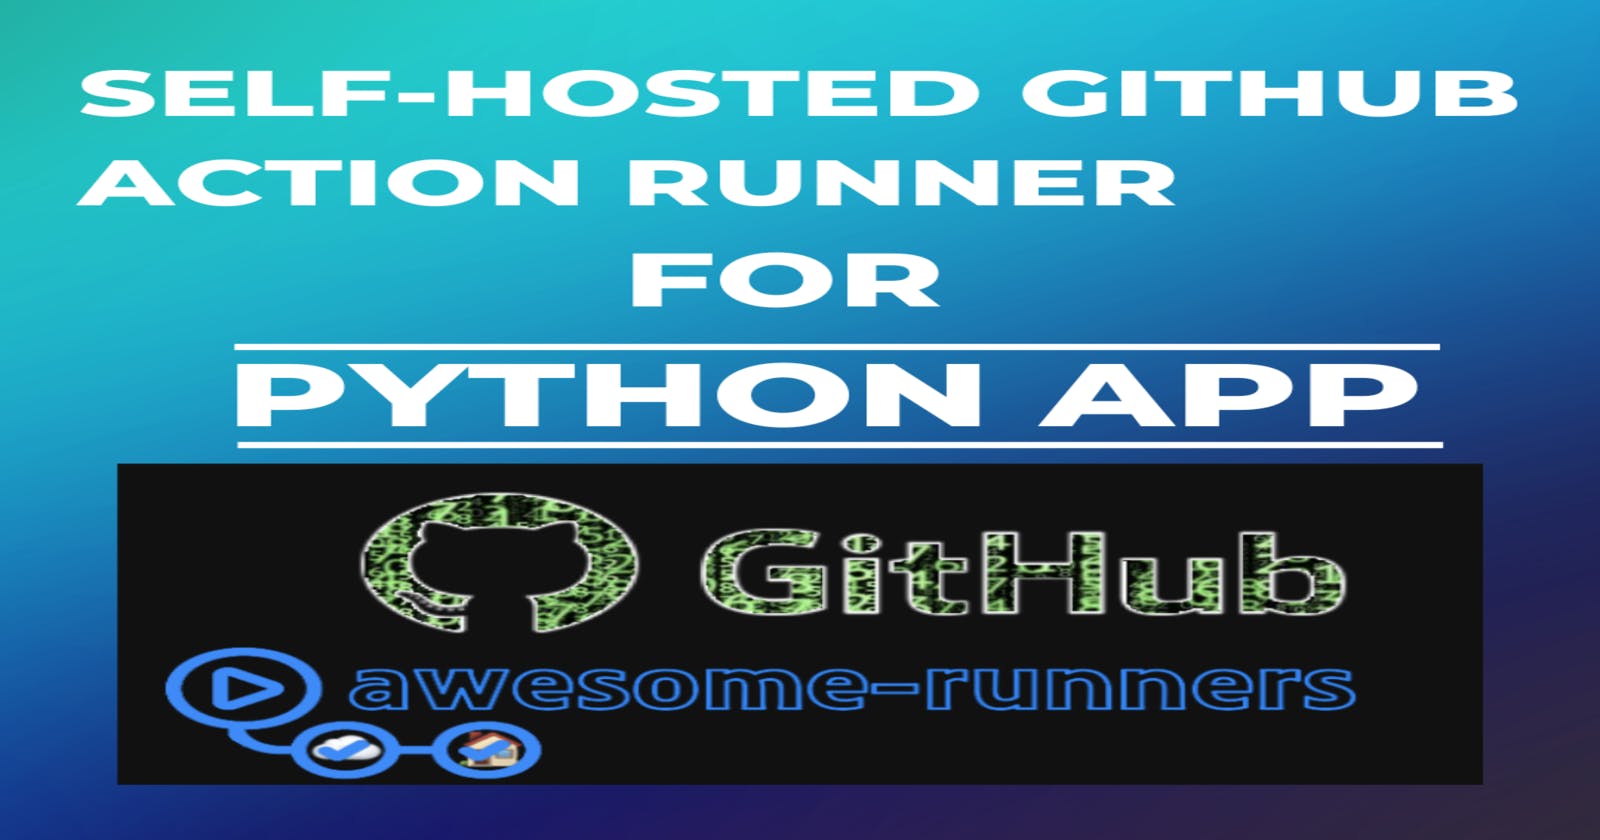 Setting up a Self-Hosted GitHub Action Runner for Python Applications on EC2 Instance